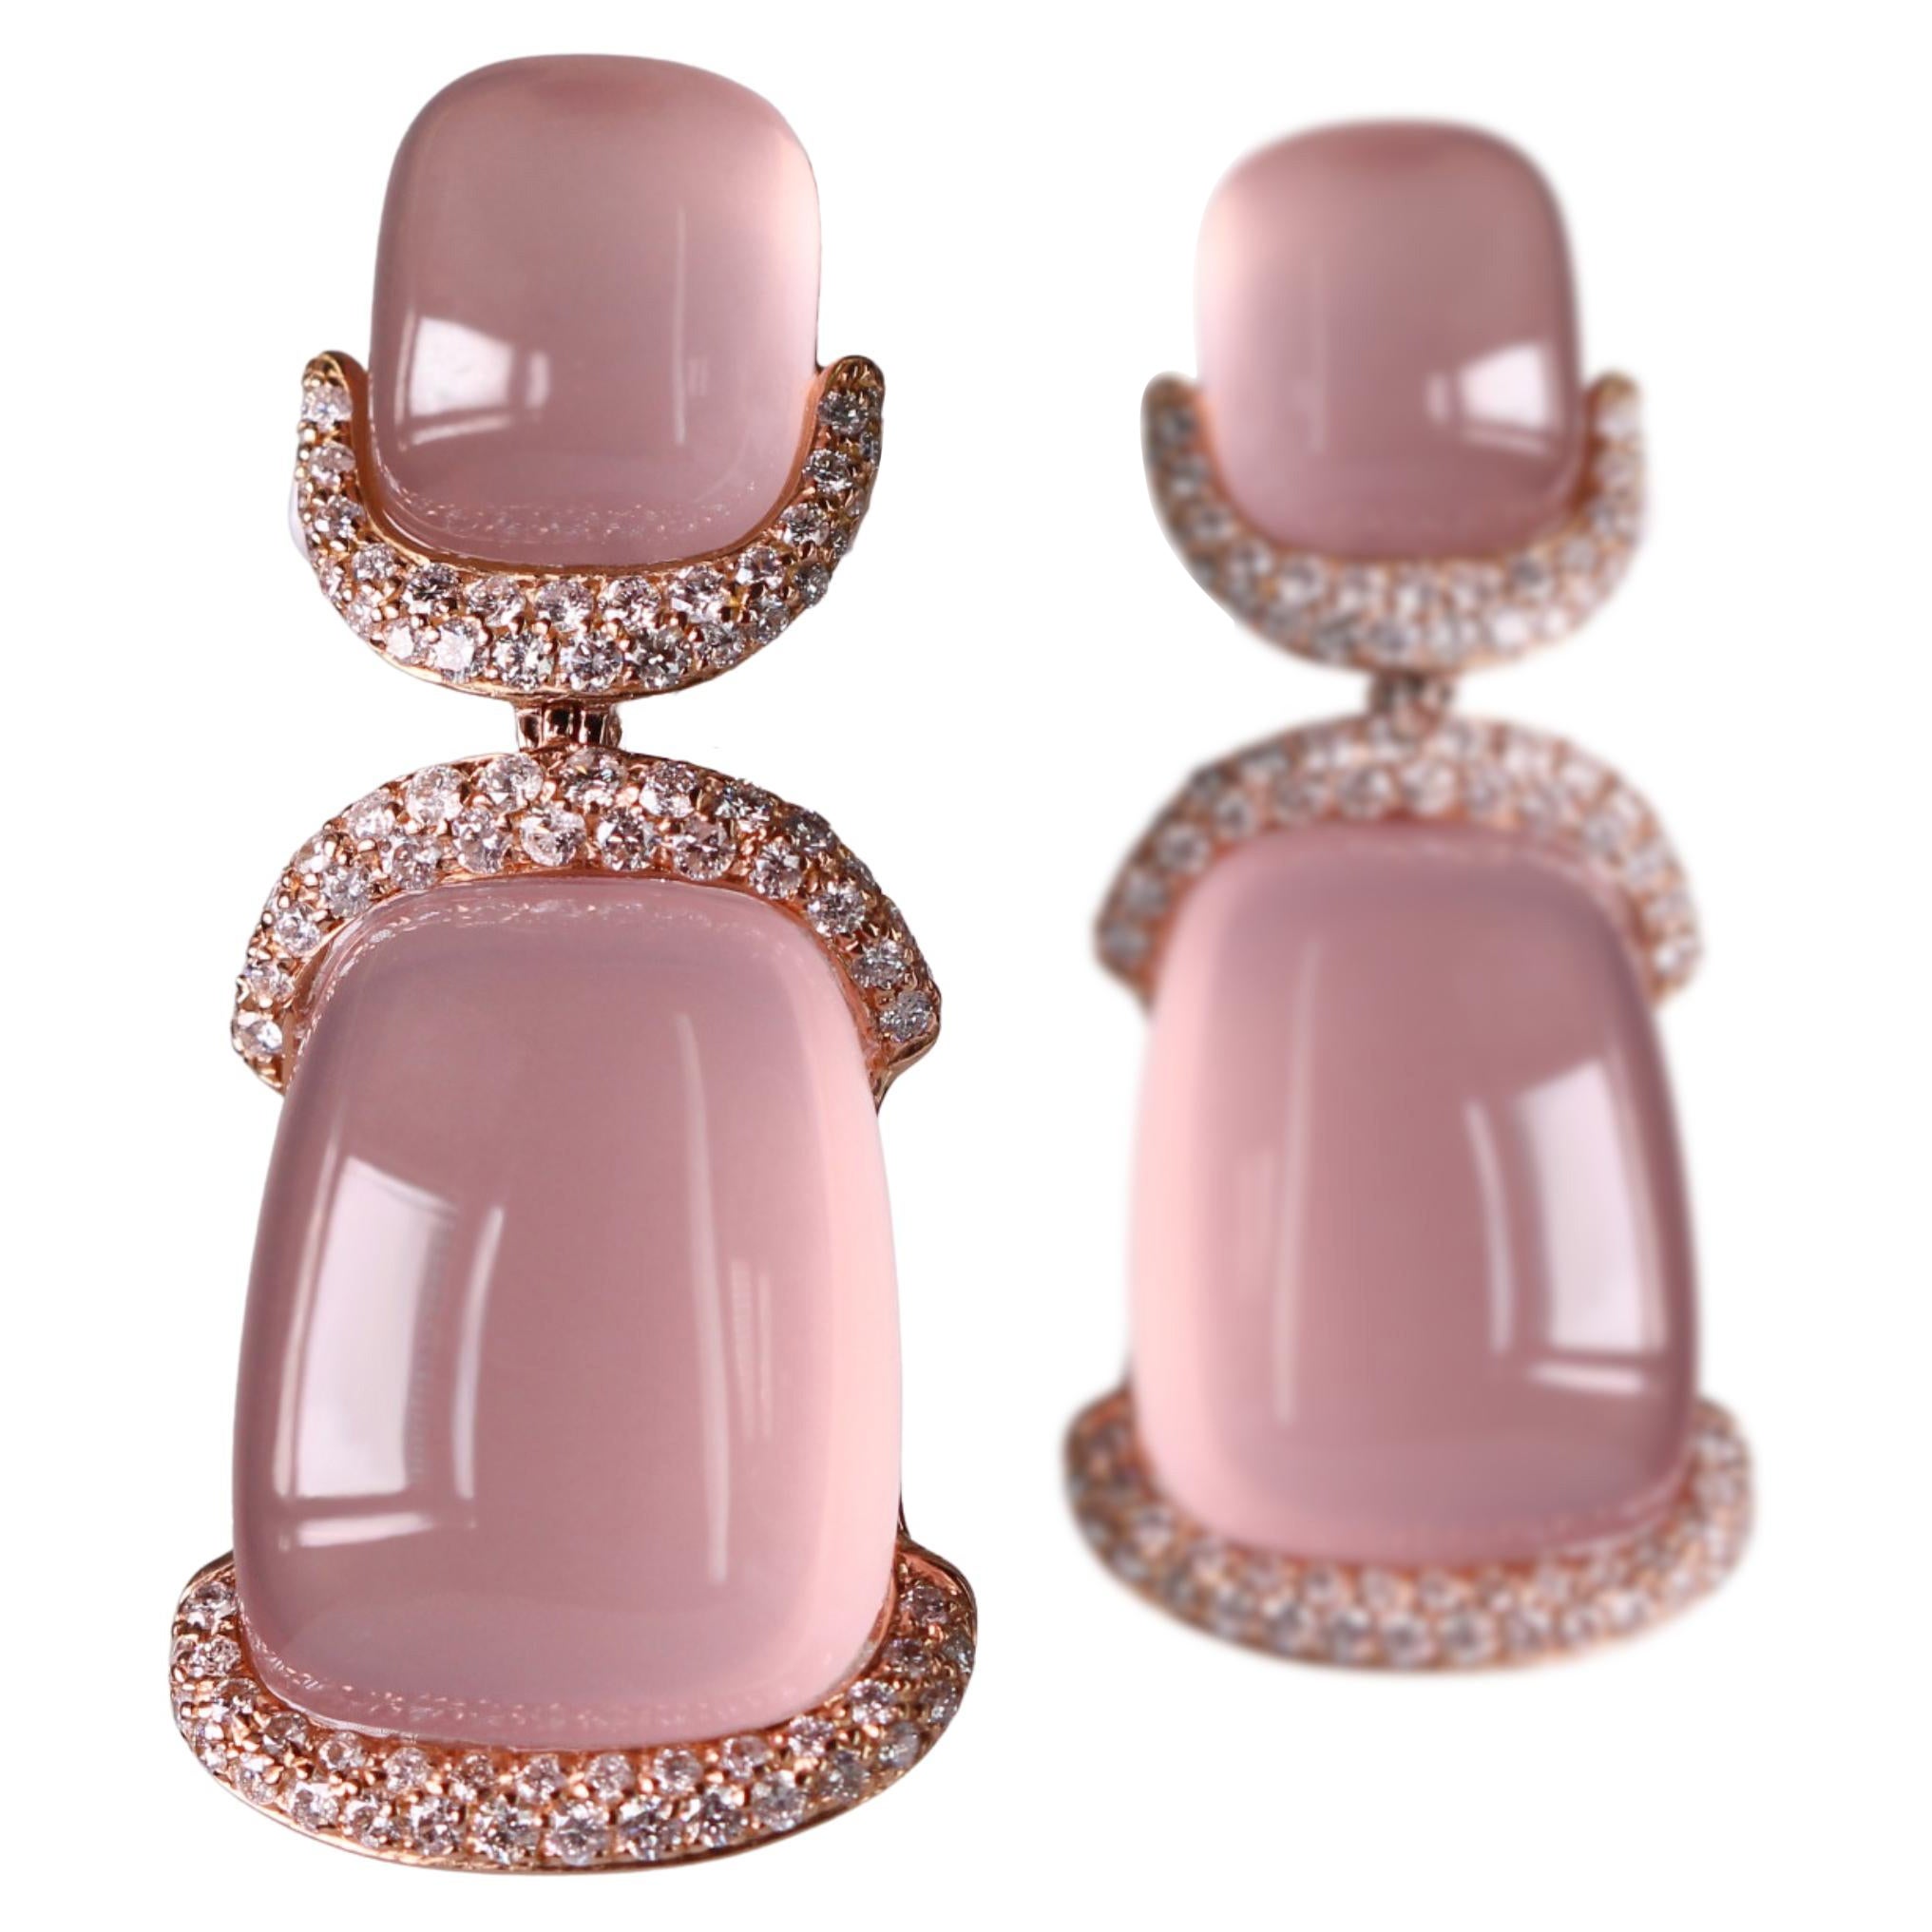 Sophisticated Charm: 18kt Rose Gold Earrings with Pink Quartz and Diamonds